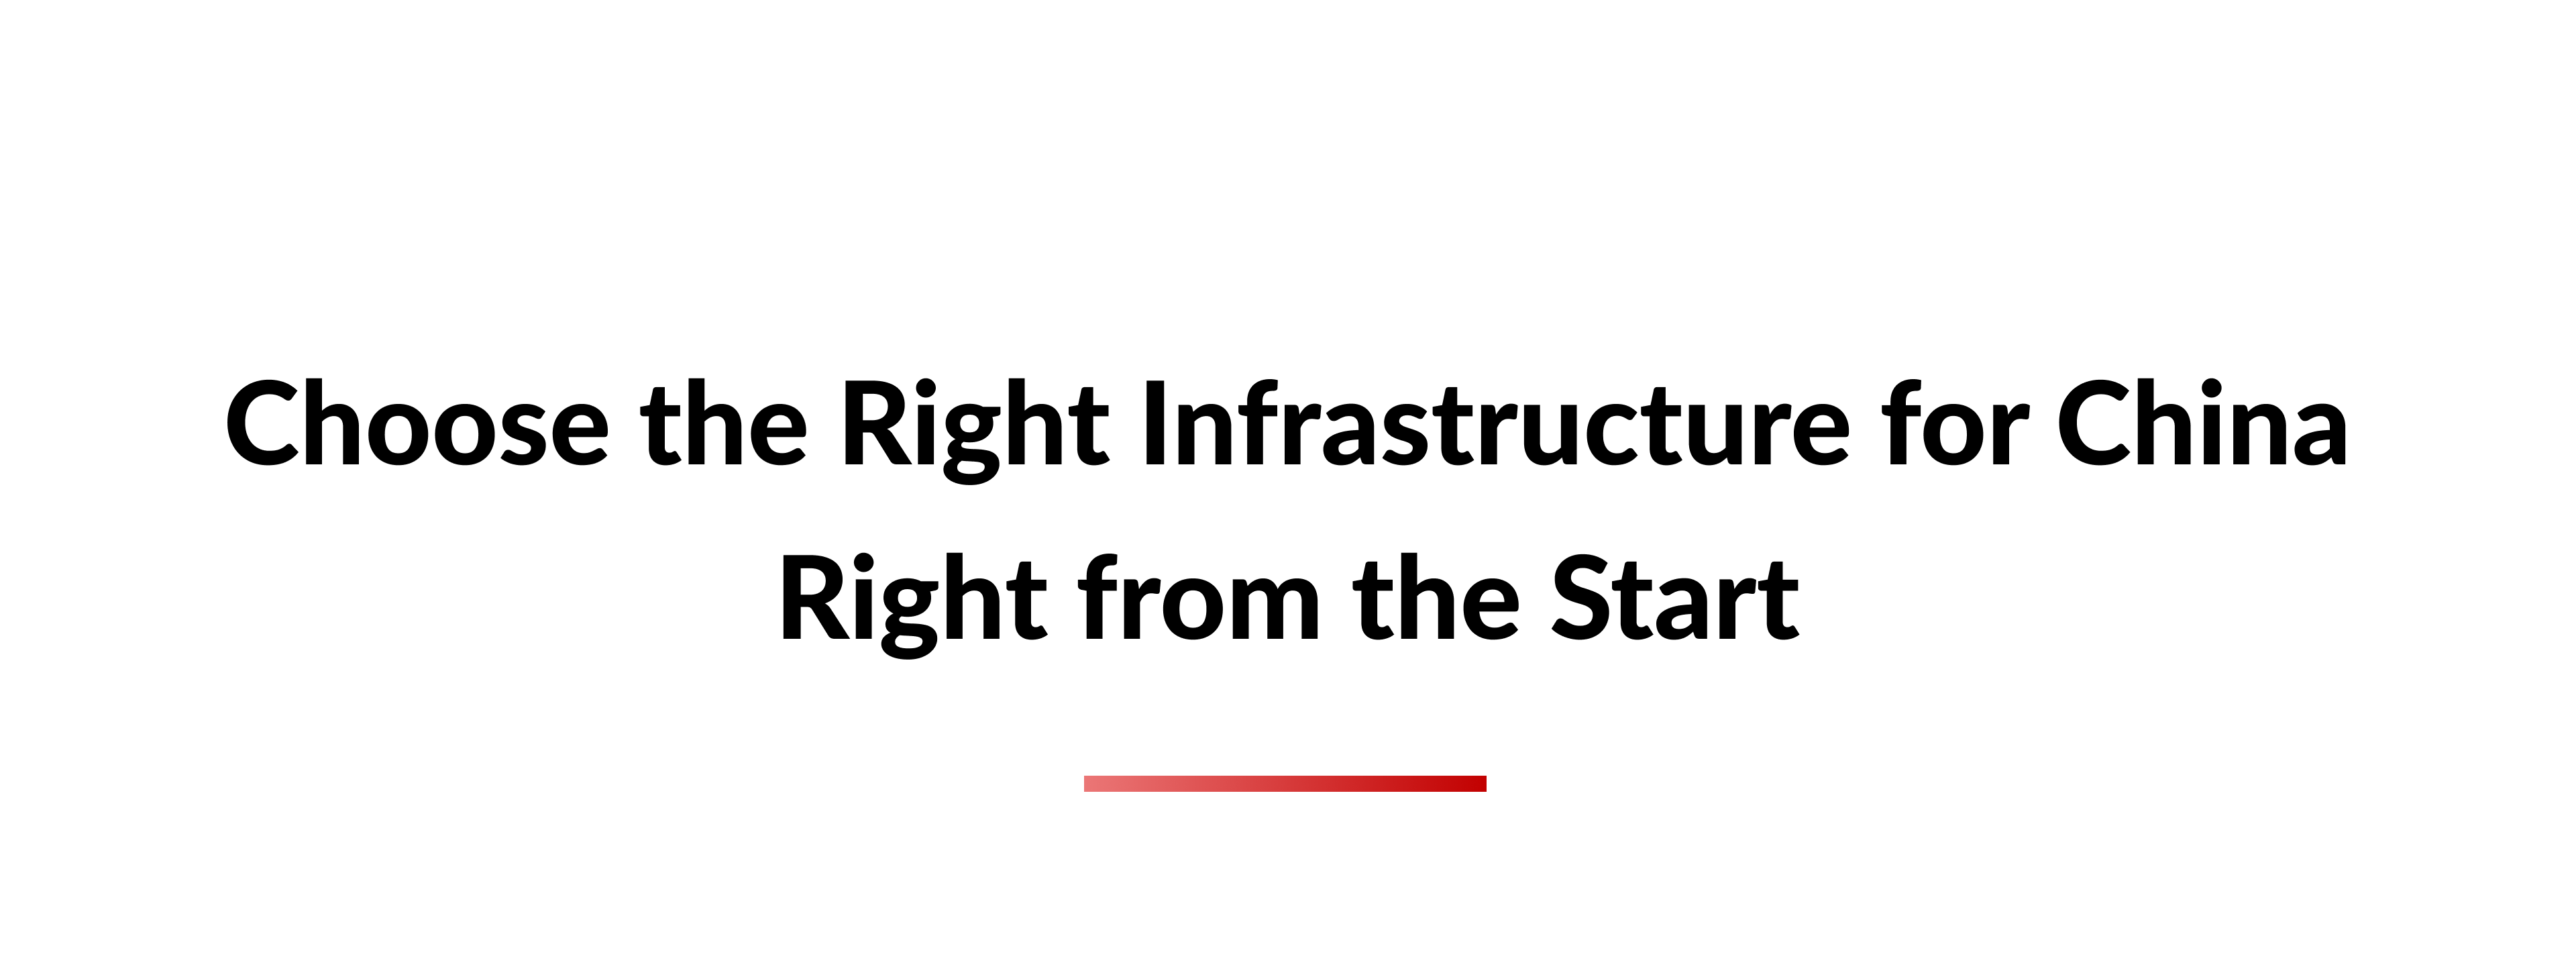 ITC can help you choose the right technological infrastructure for China right from the start